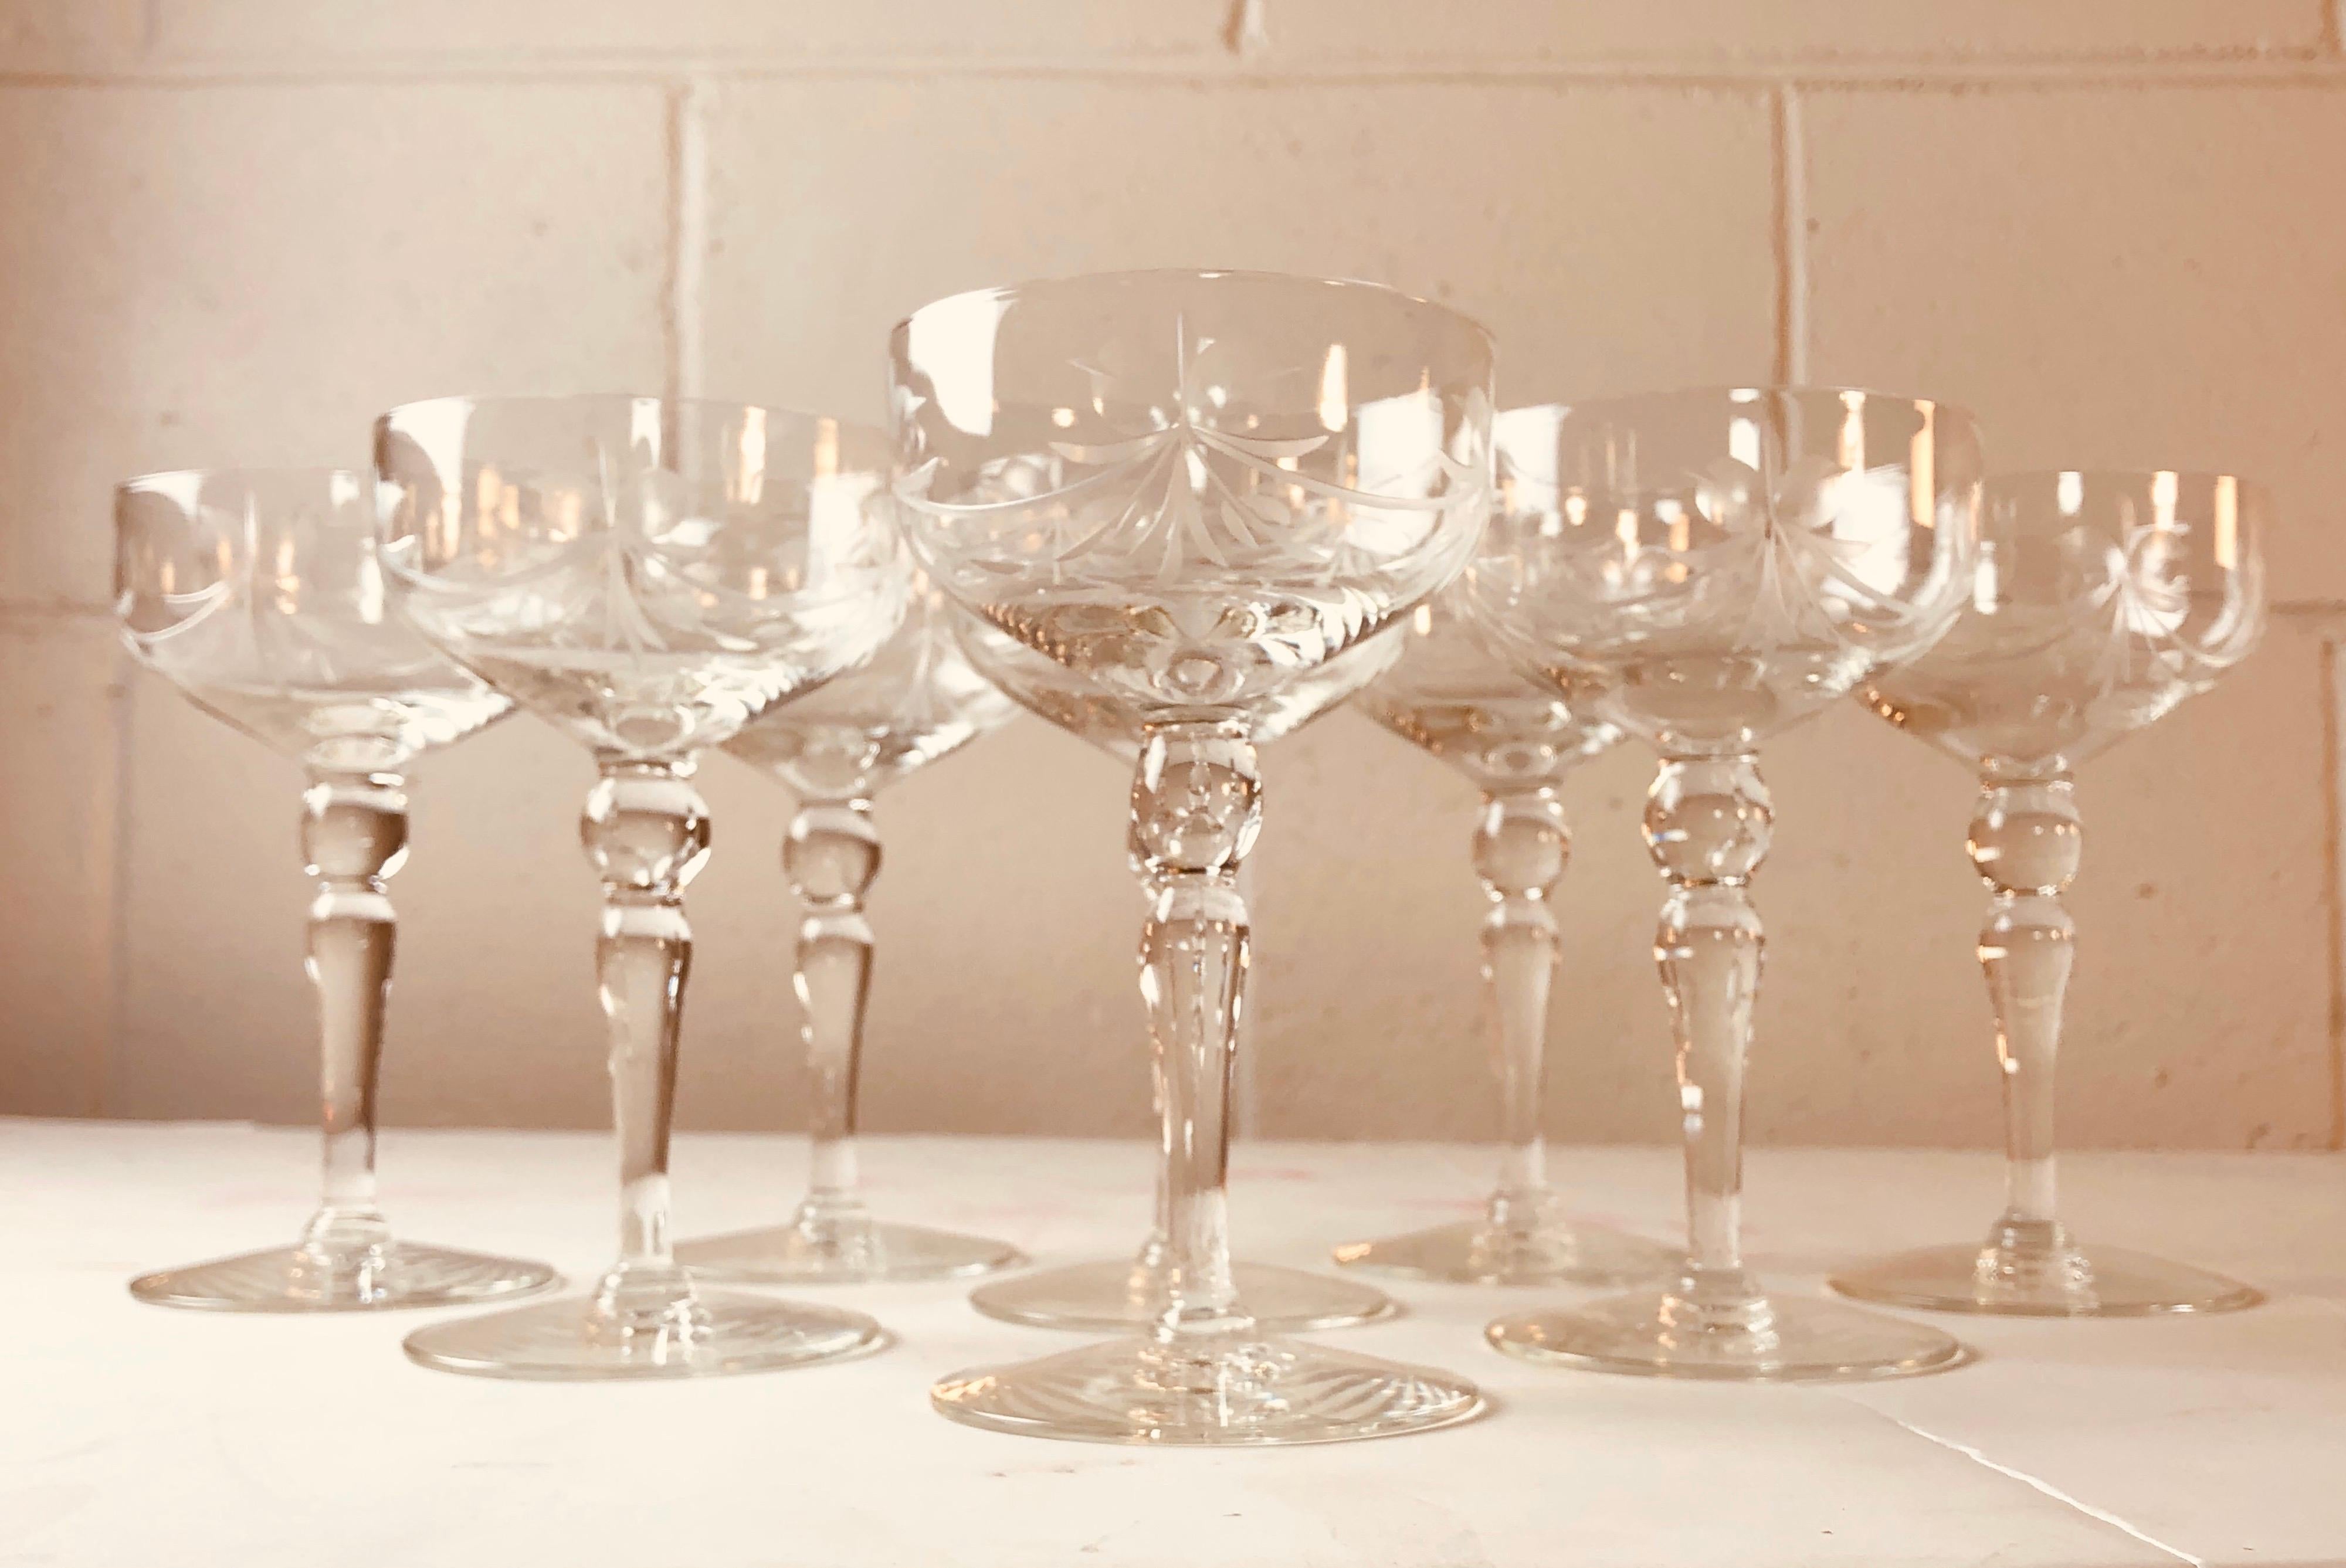 1950s Floral and Bow Tie Etched Glass Coupes, Set of 8 For Sale 2